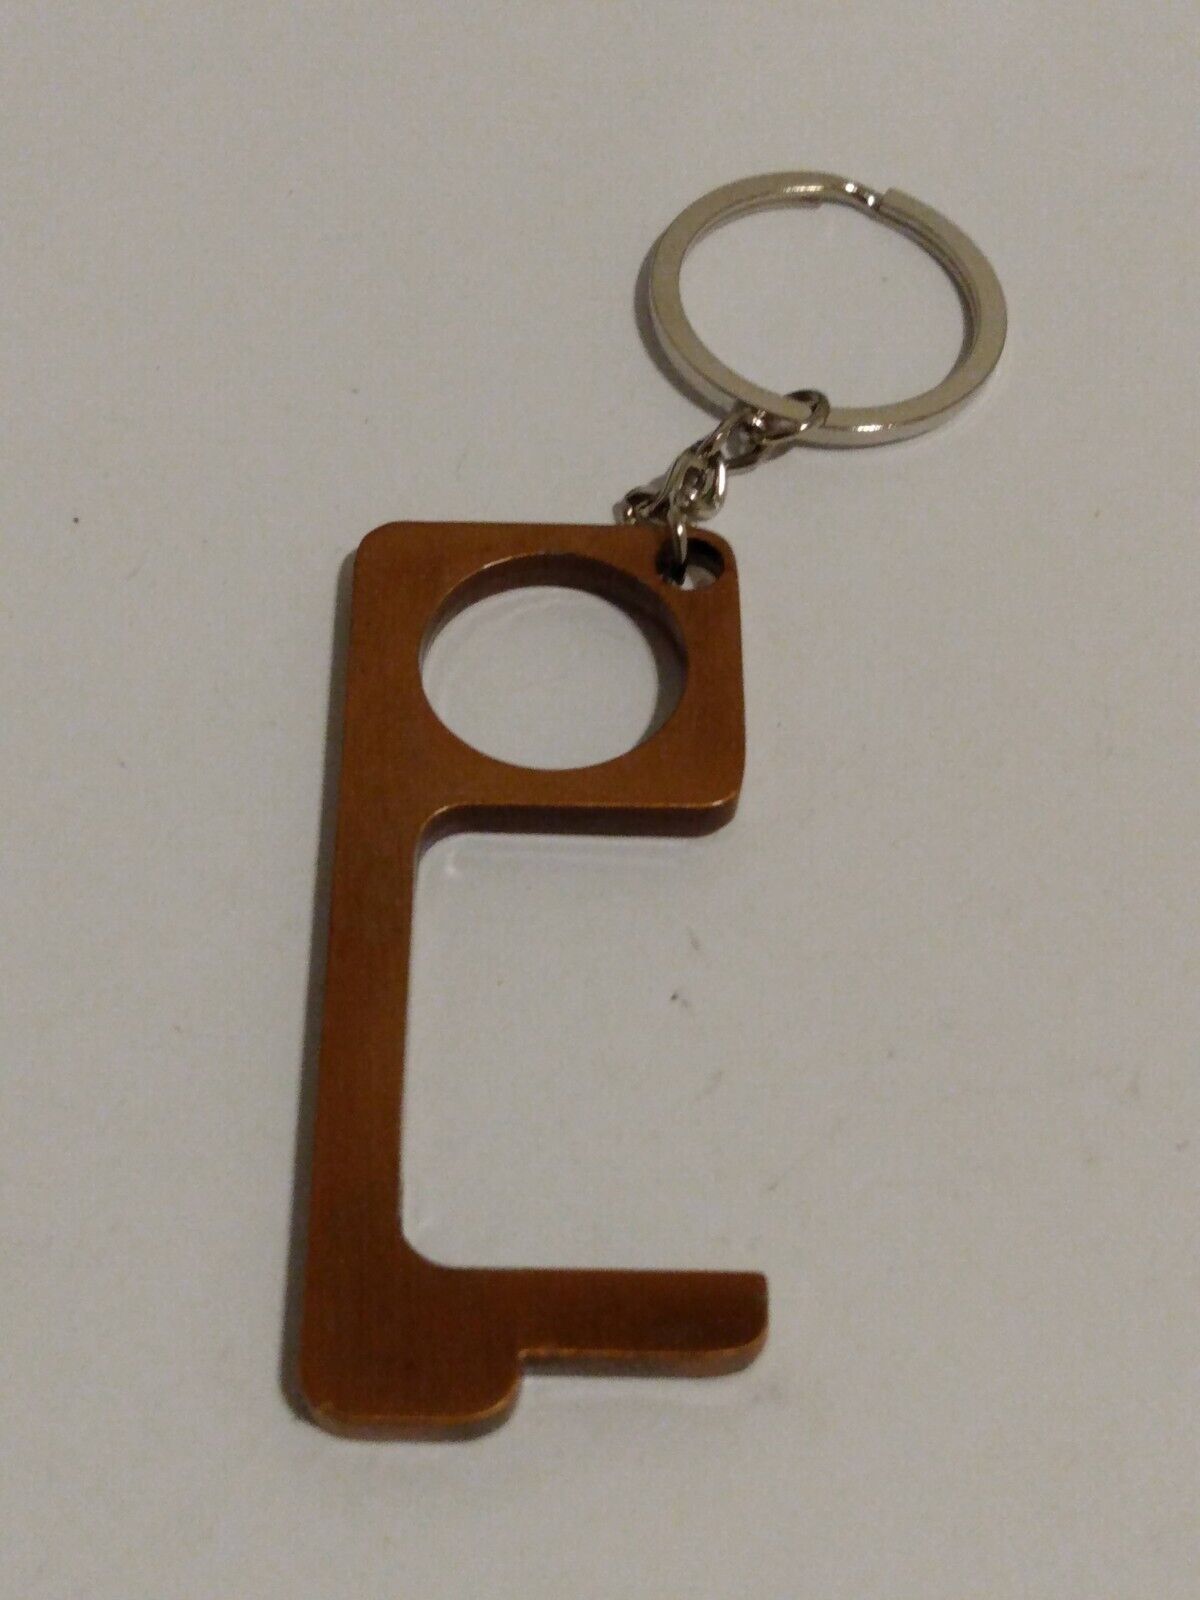 No Touch Tool Keychain Accessory